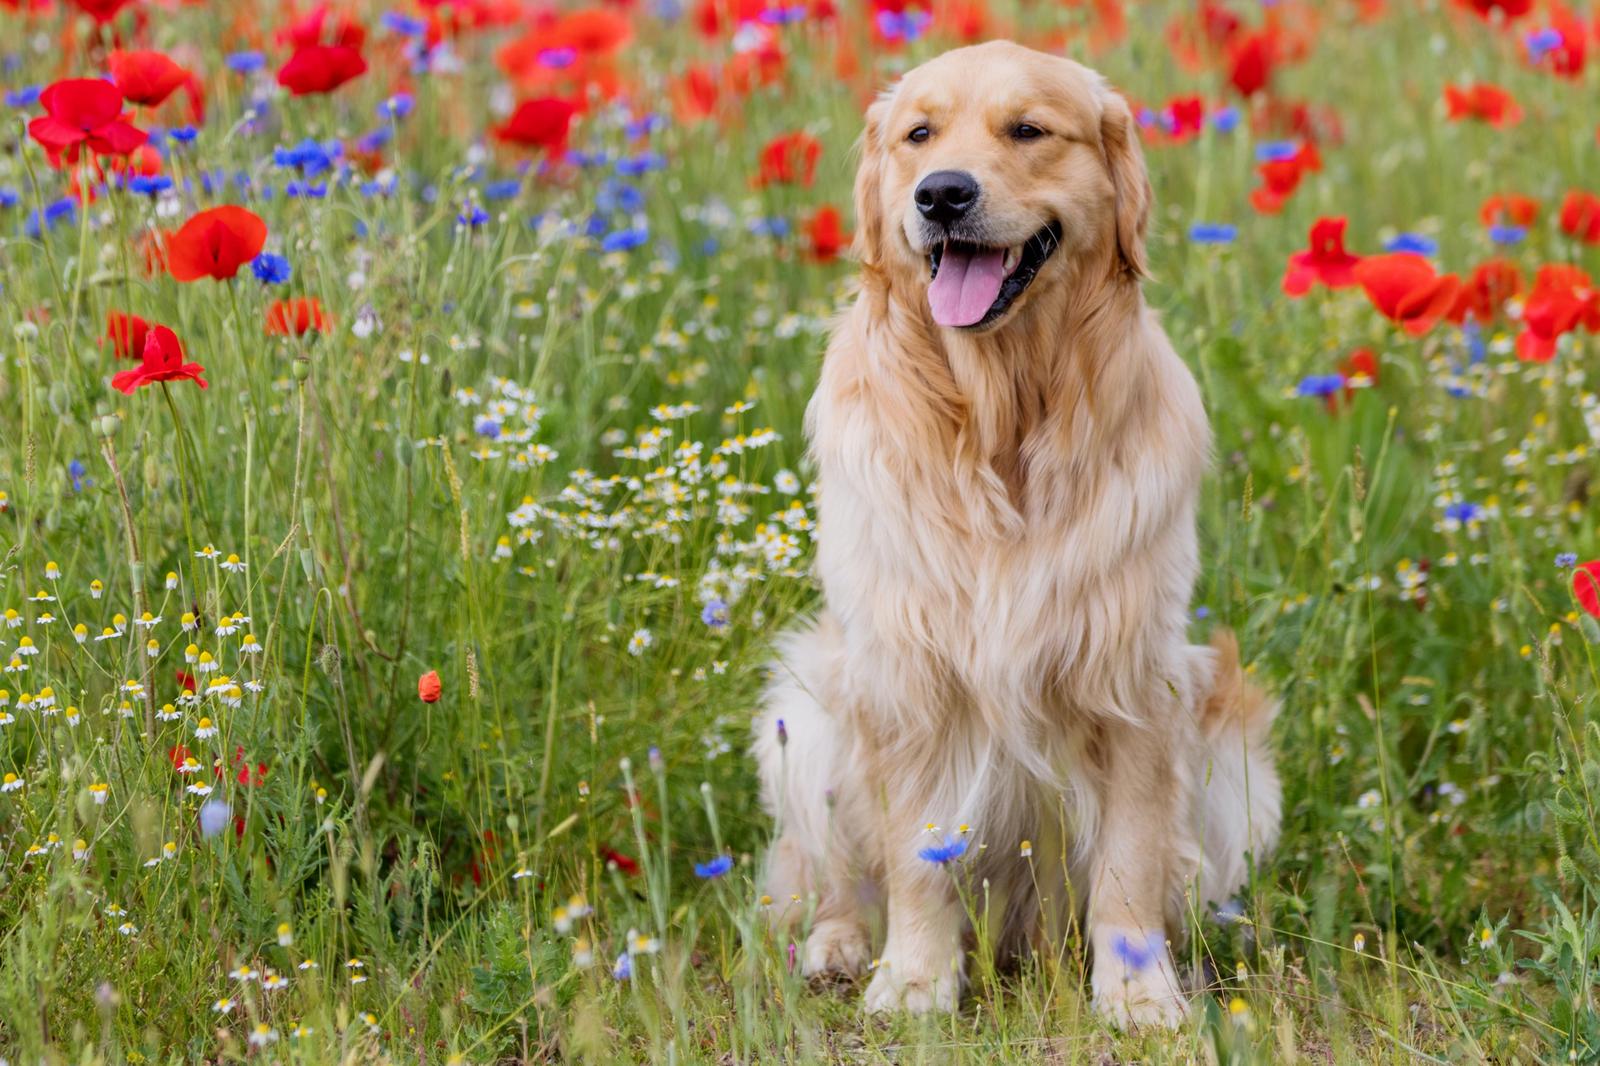 What Wild Animal Are You? Golden retriever